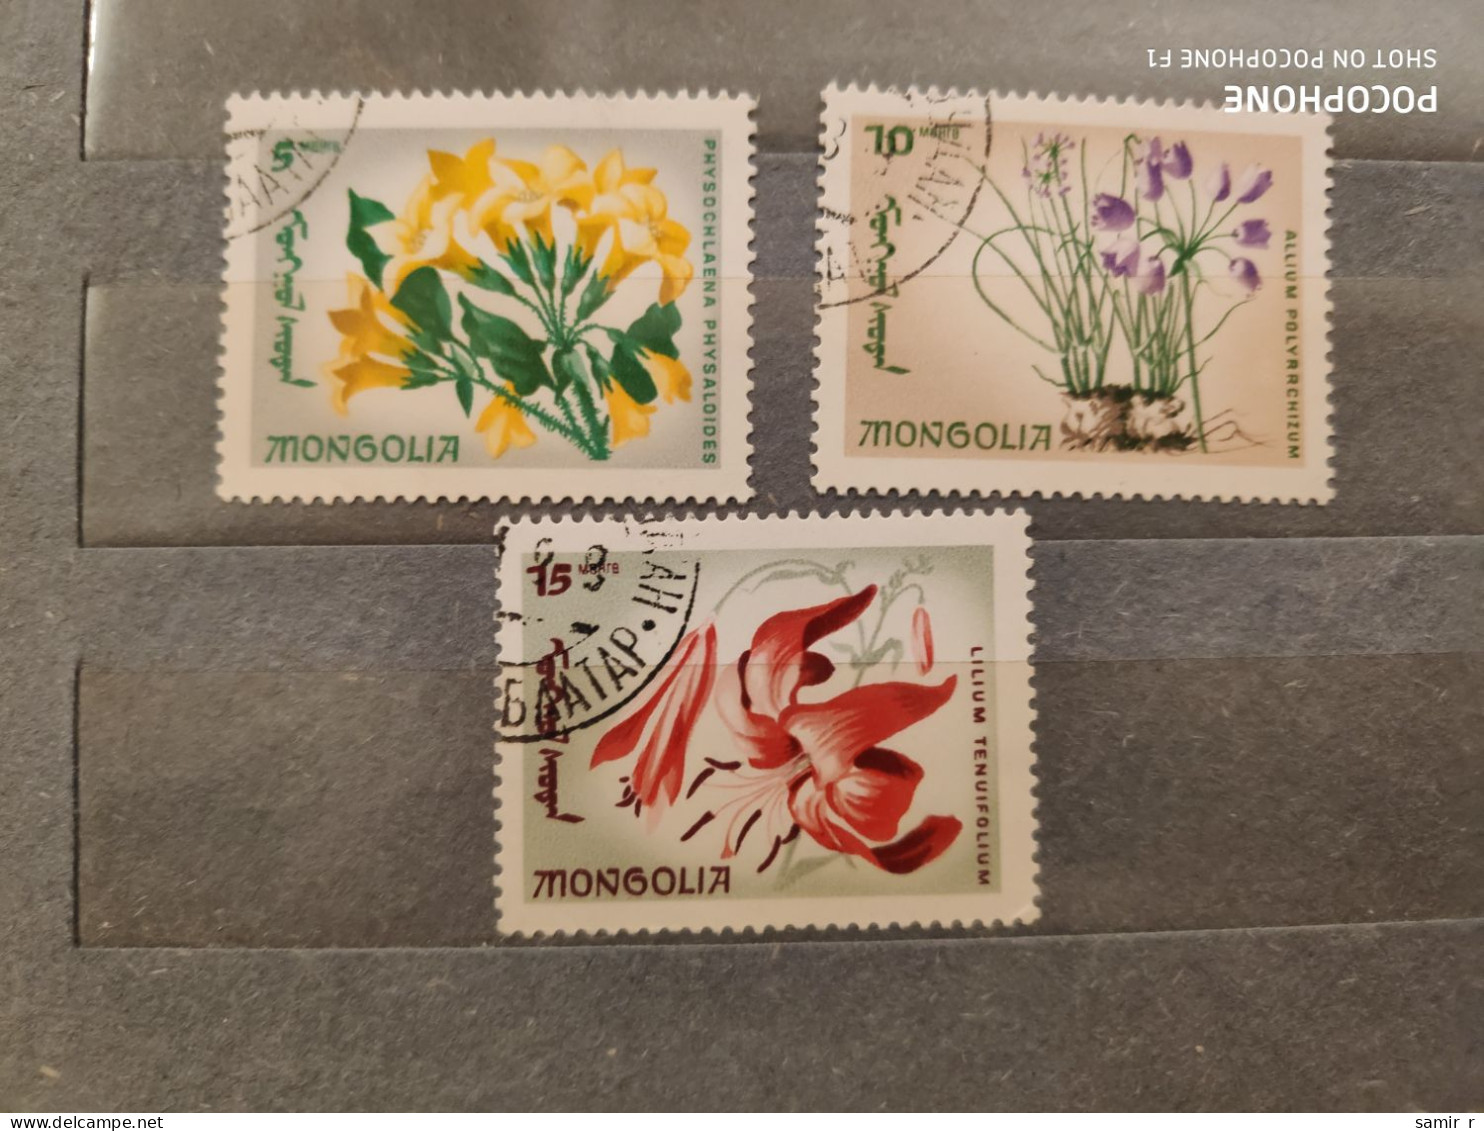 Mongolia	Flowers (F73) - Oceania (Other)